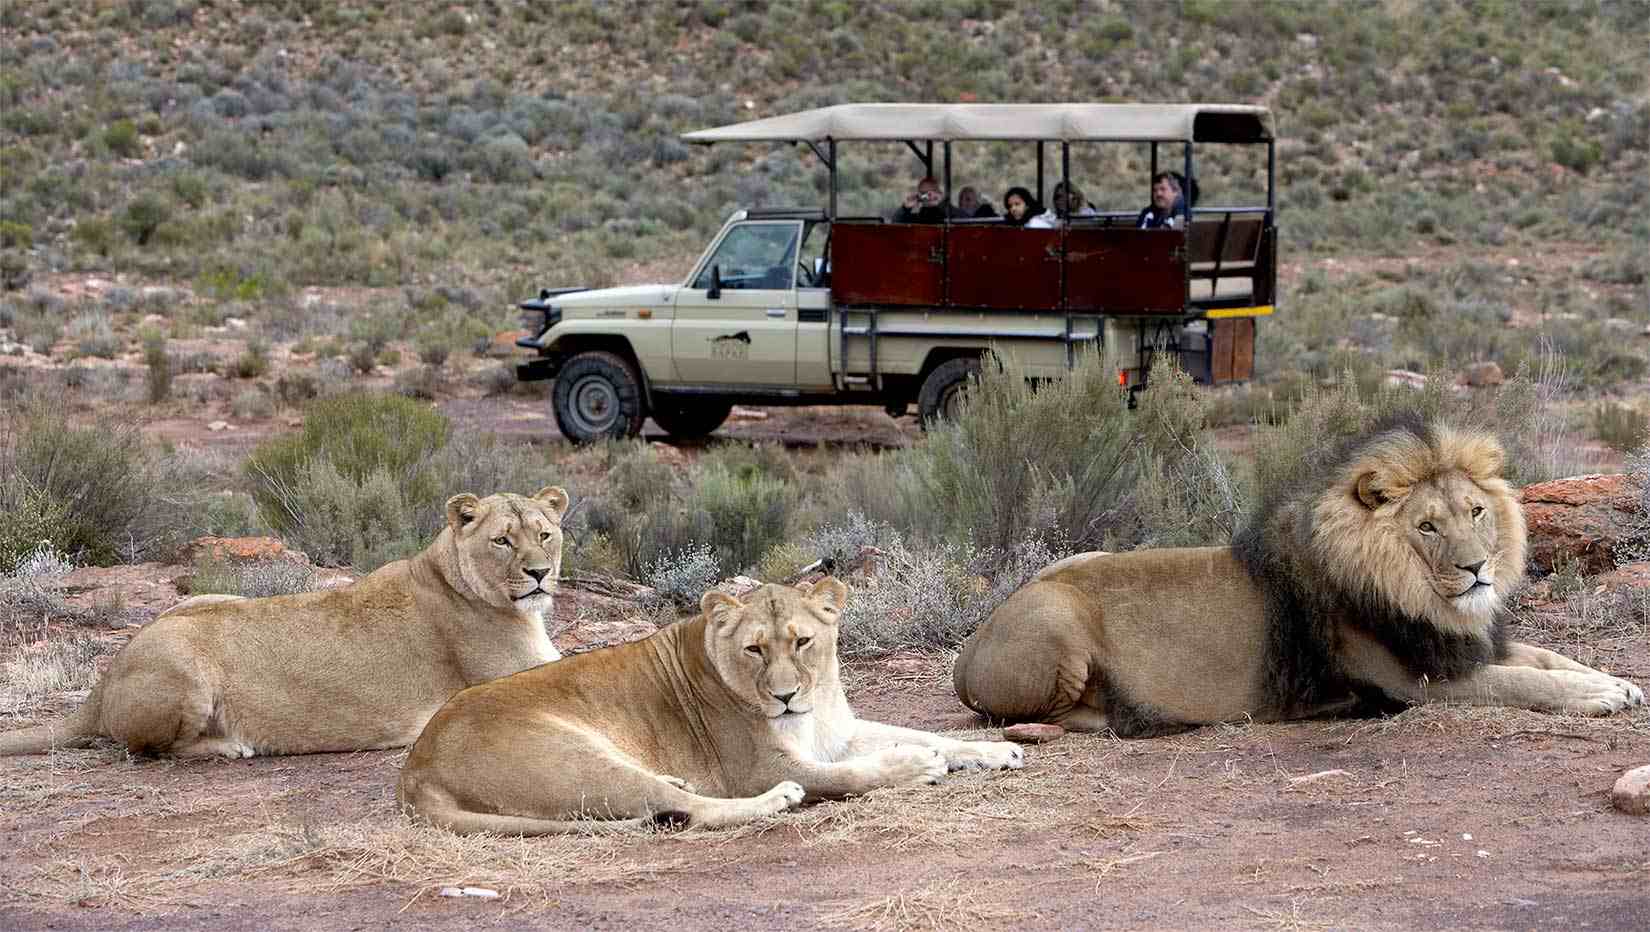 three lions lying on the ground during an Aquila game drive. Image included as part of Aquila's "About Us" information page.